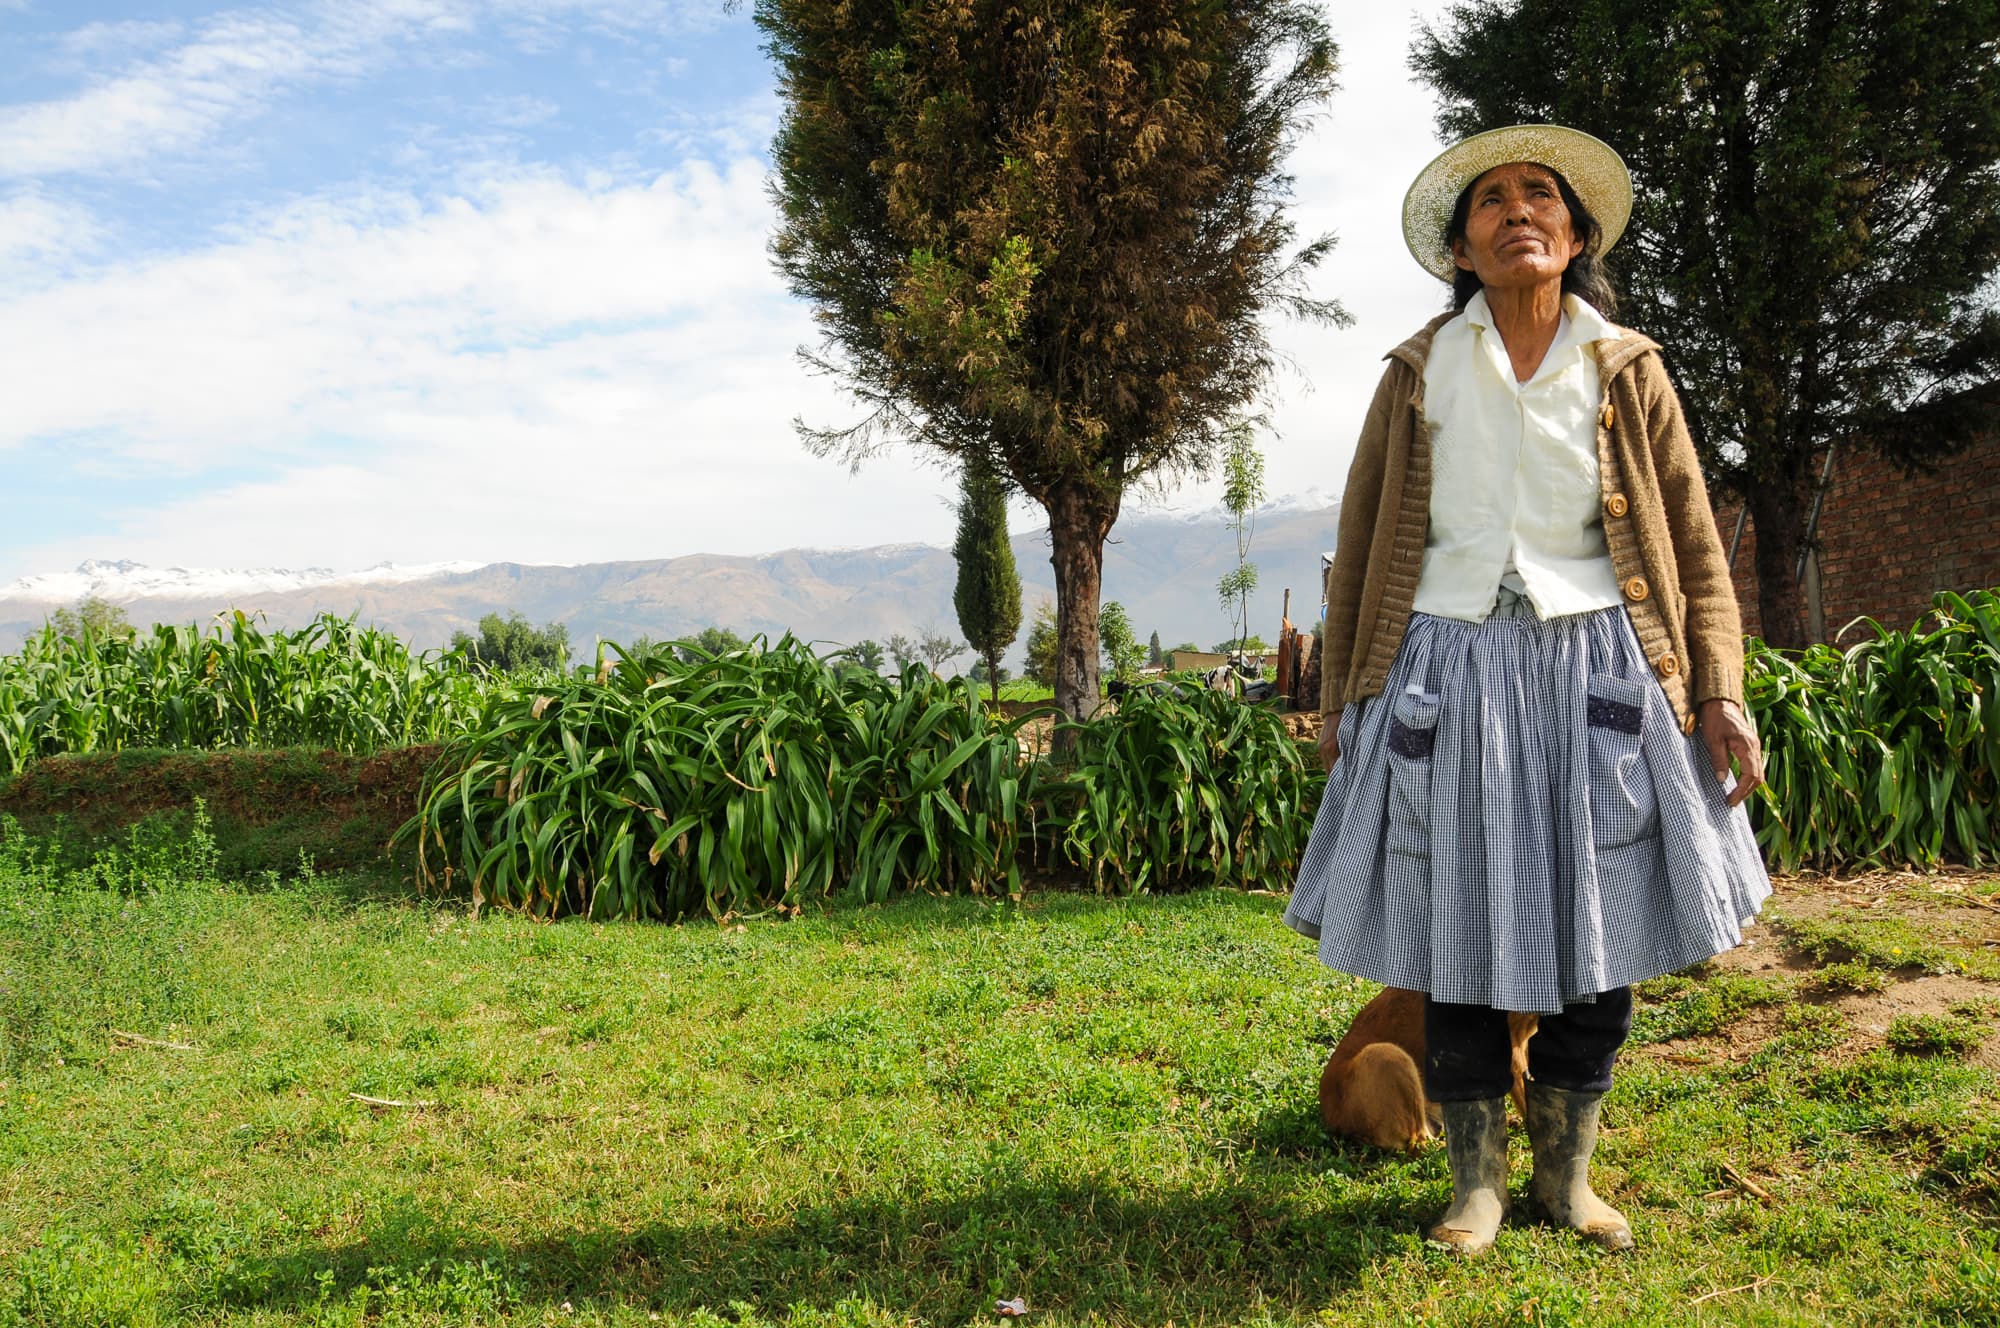 Women's Day, Investing in Women in Bolivia